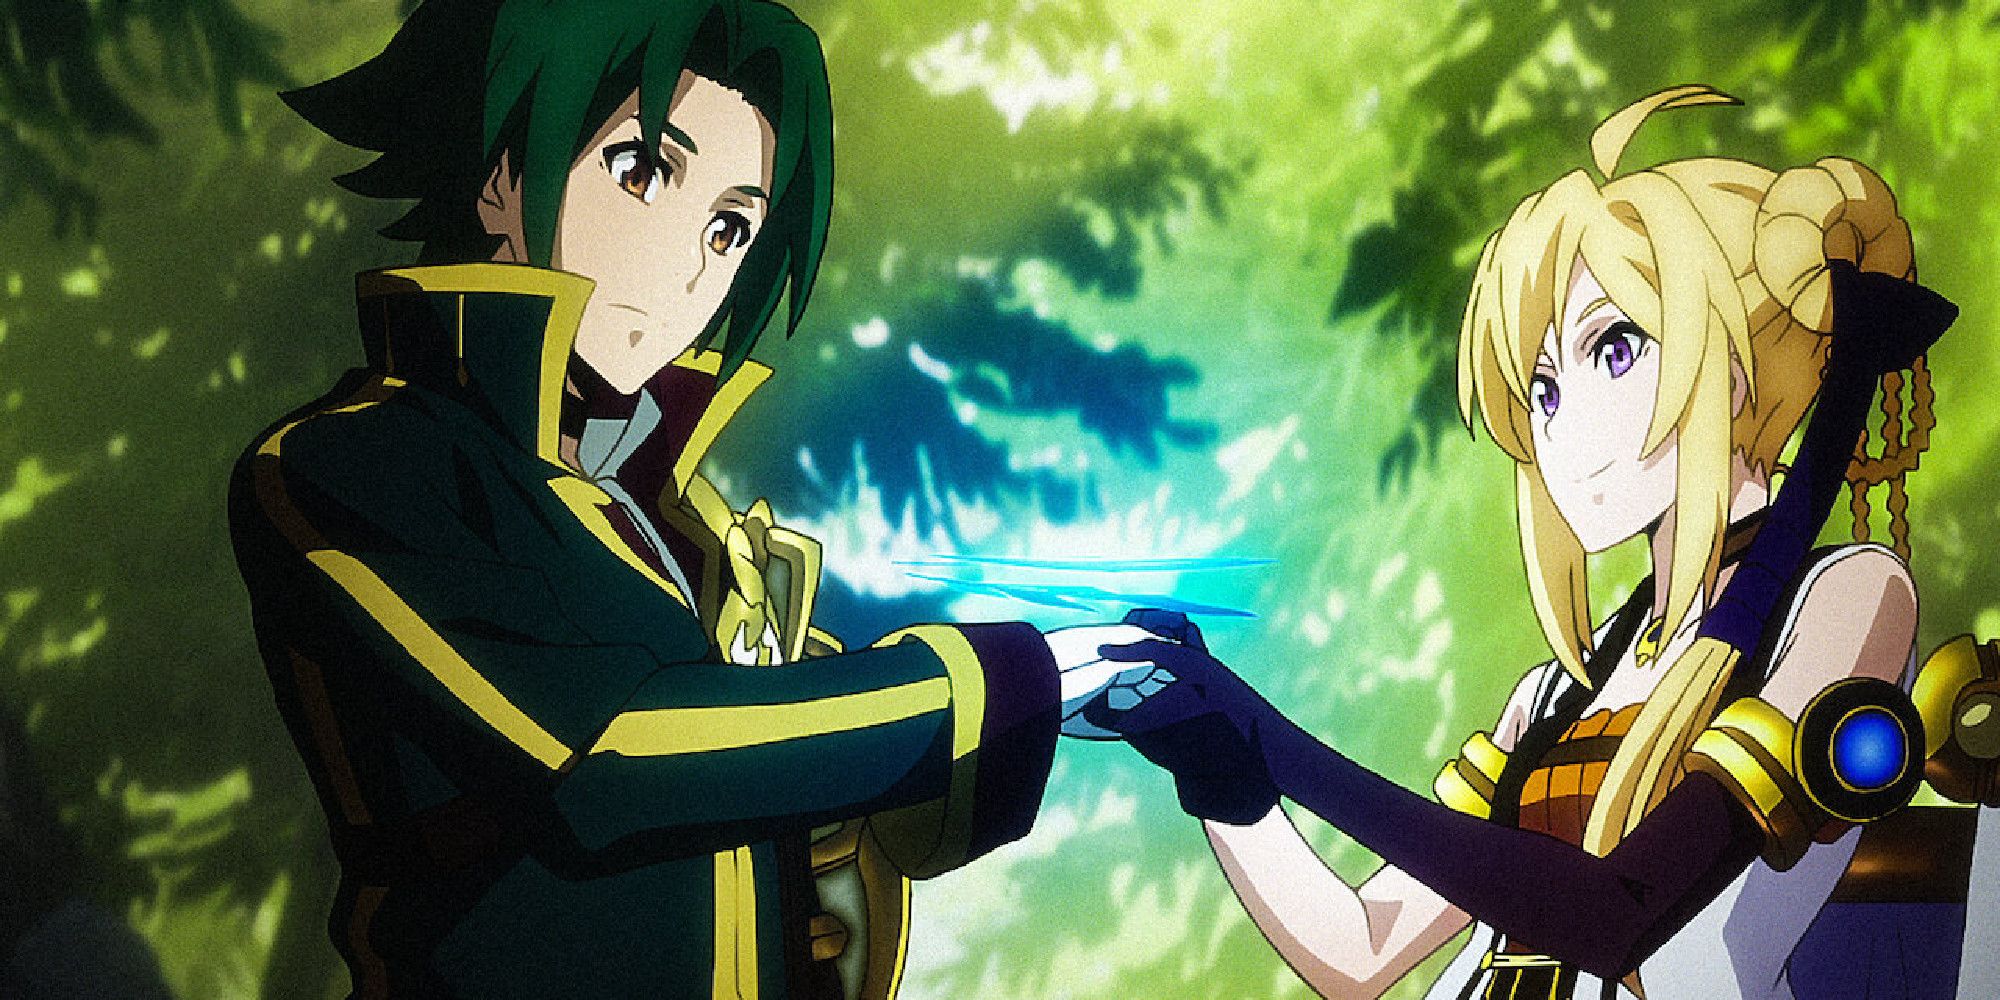 Theo and Siluca from Record of Grancrest War